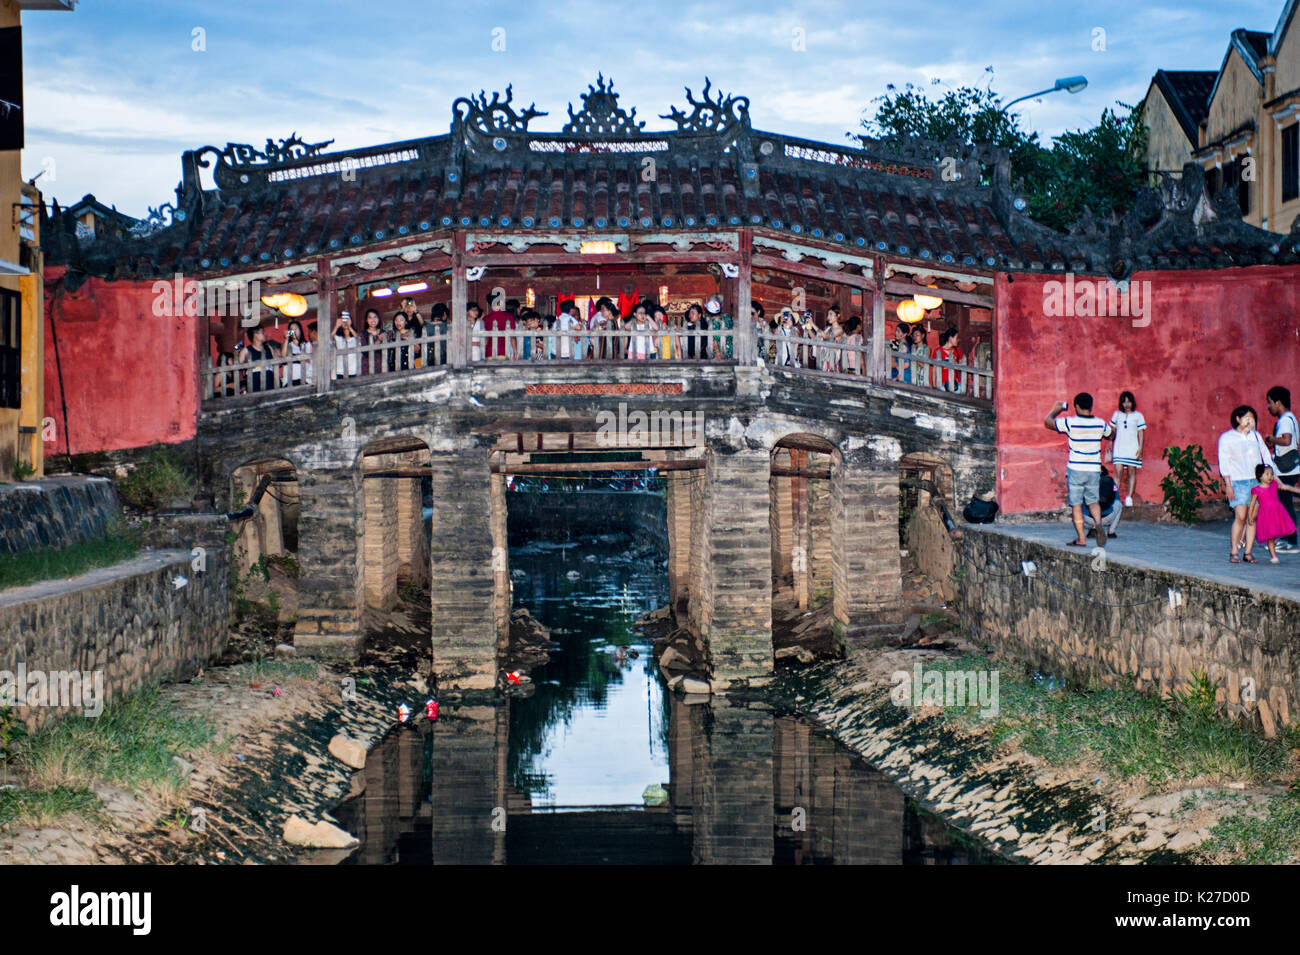 Japanese Covered Bridge, Hoi An Ancient Town, Vietnam.  This bridge was built by the Japanese in the early 1600s. Stock Photo